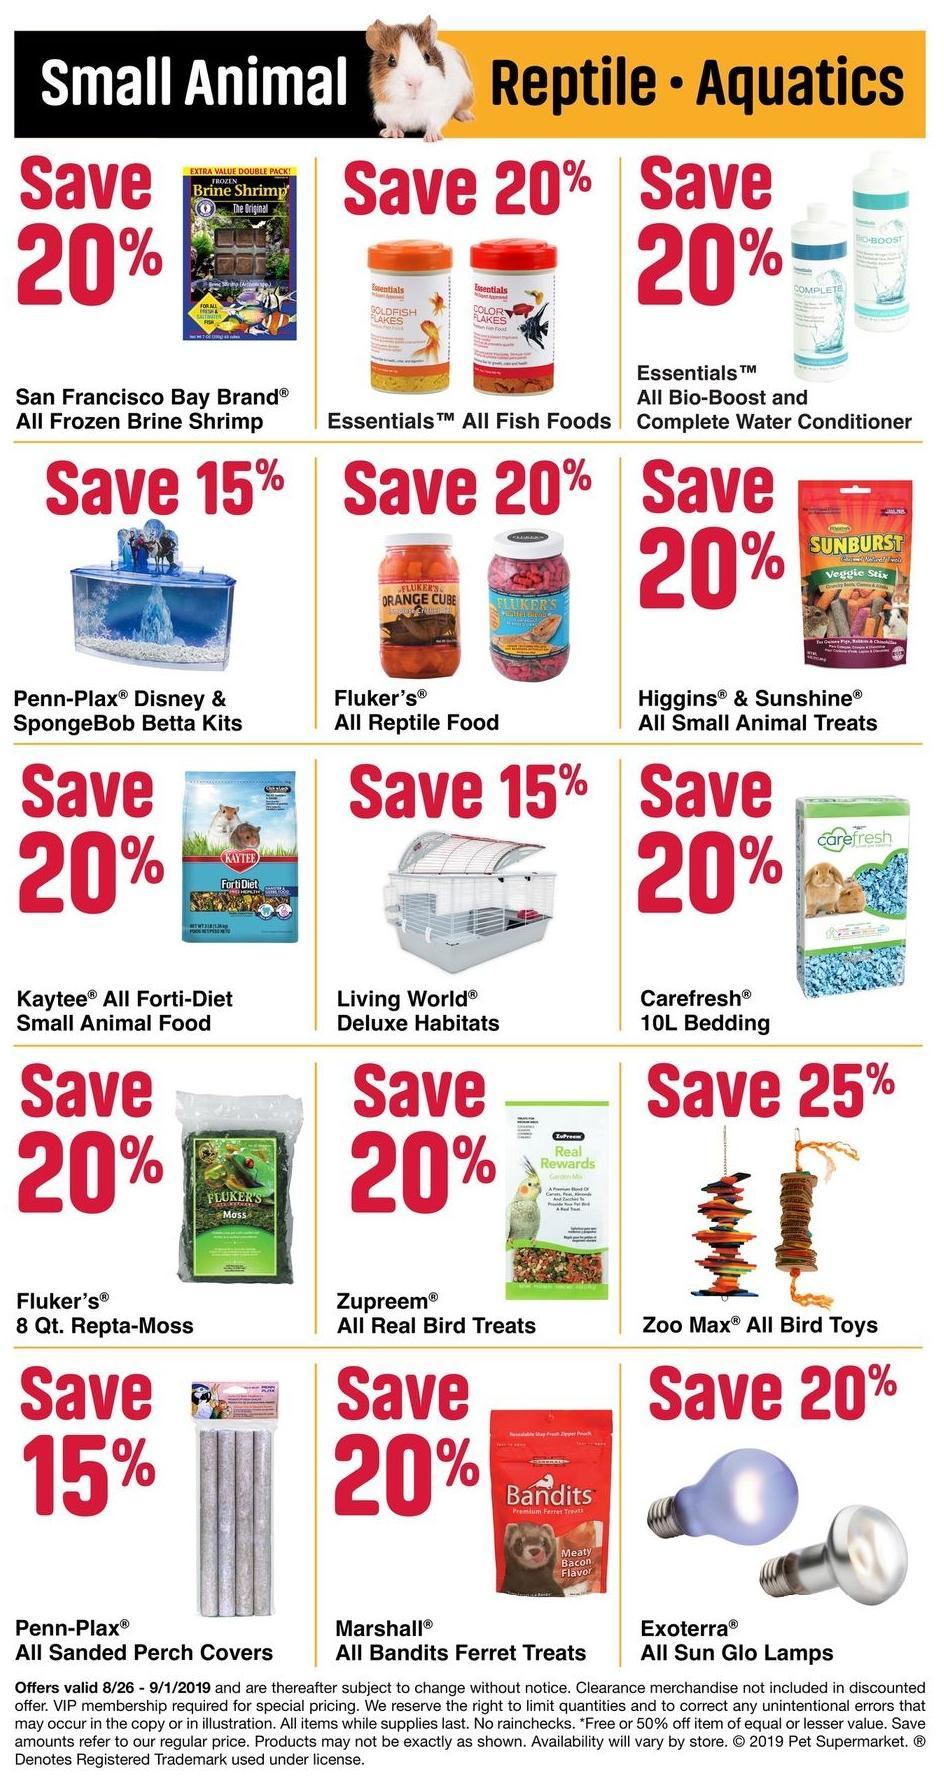 Pet Supermarket Weekly Ad from August 26